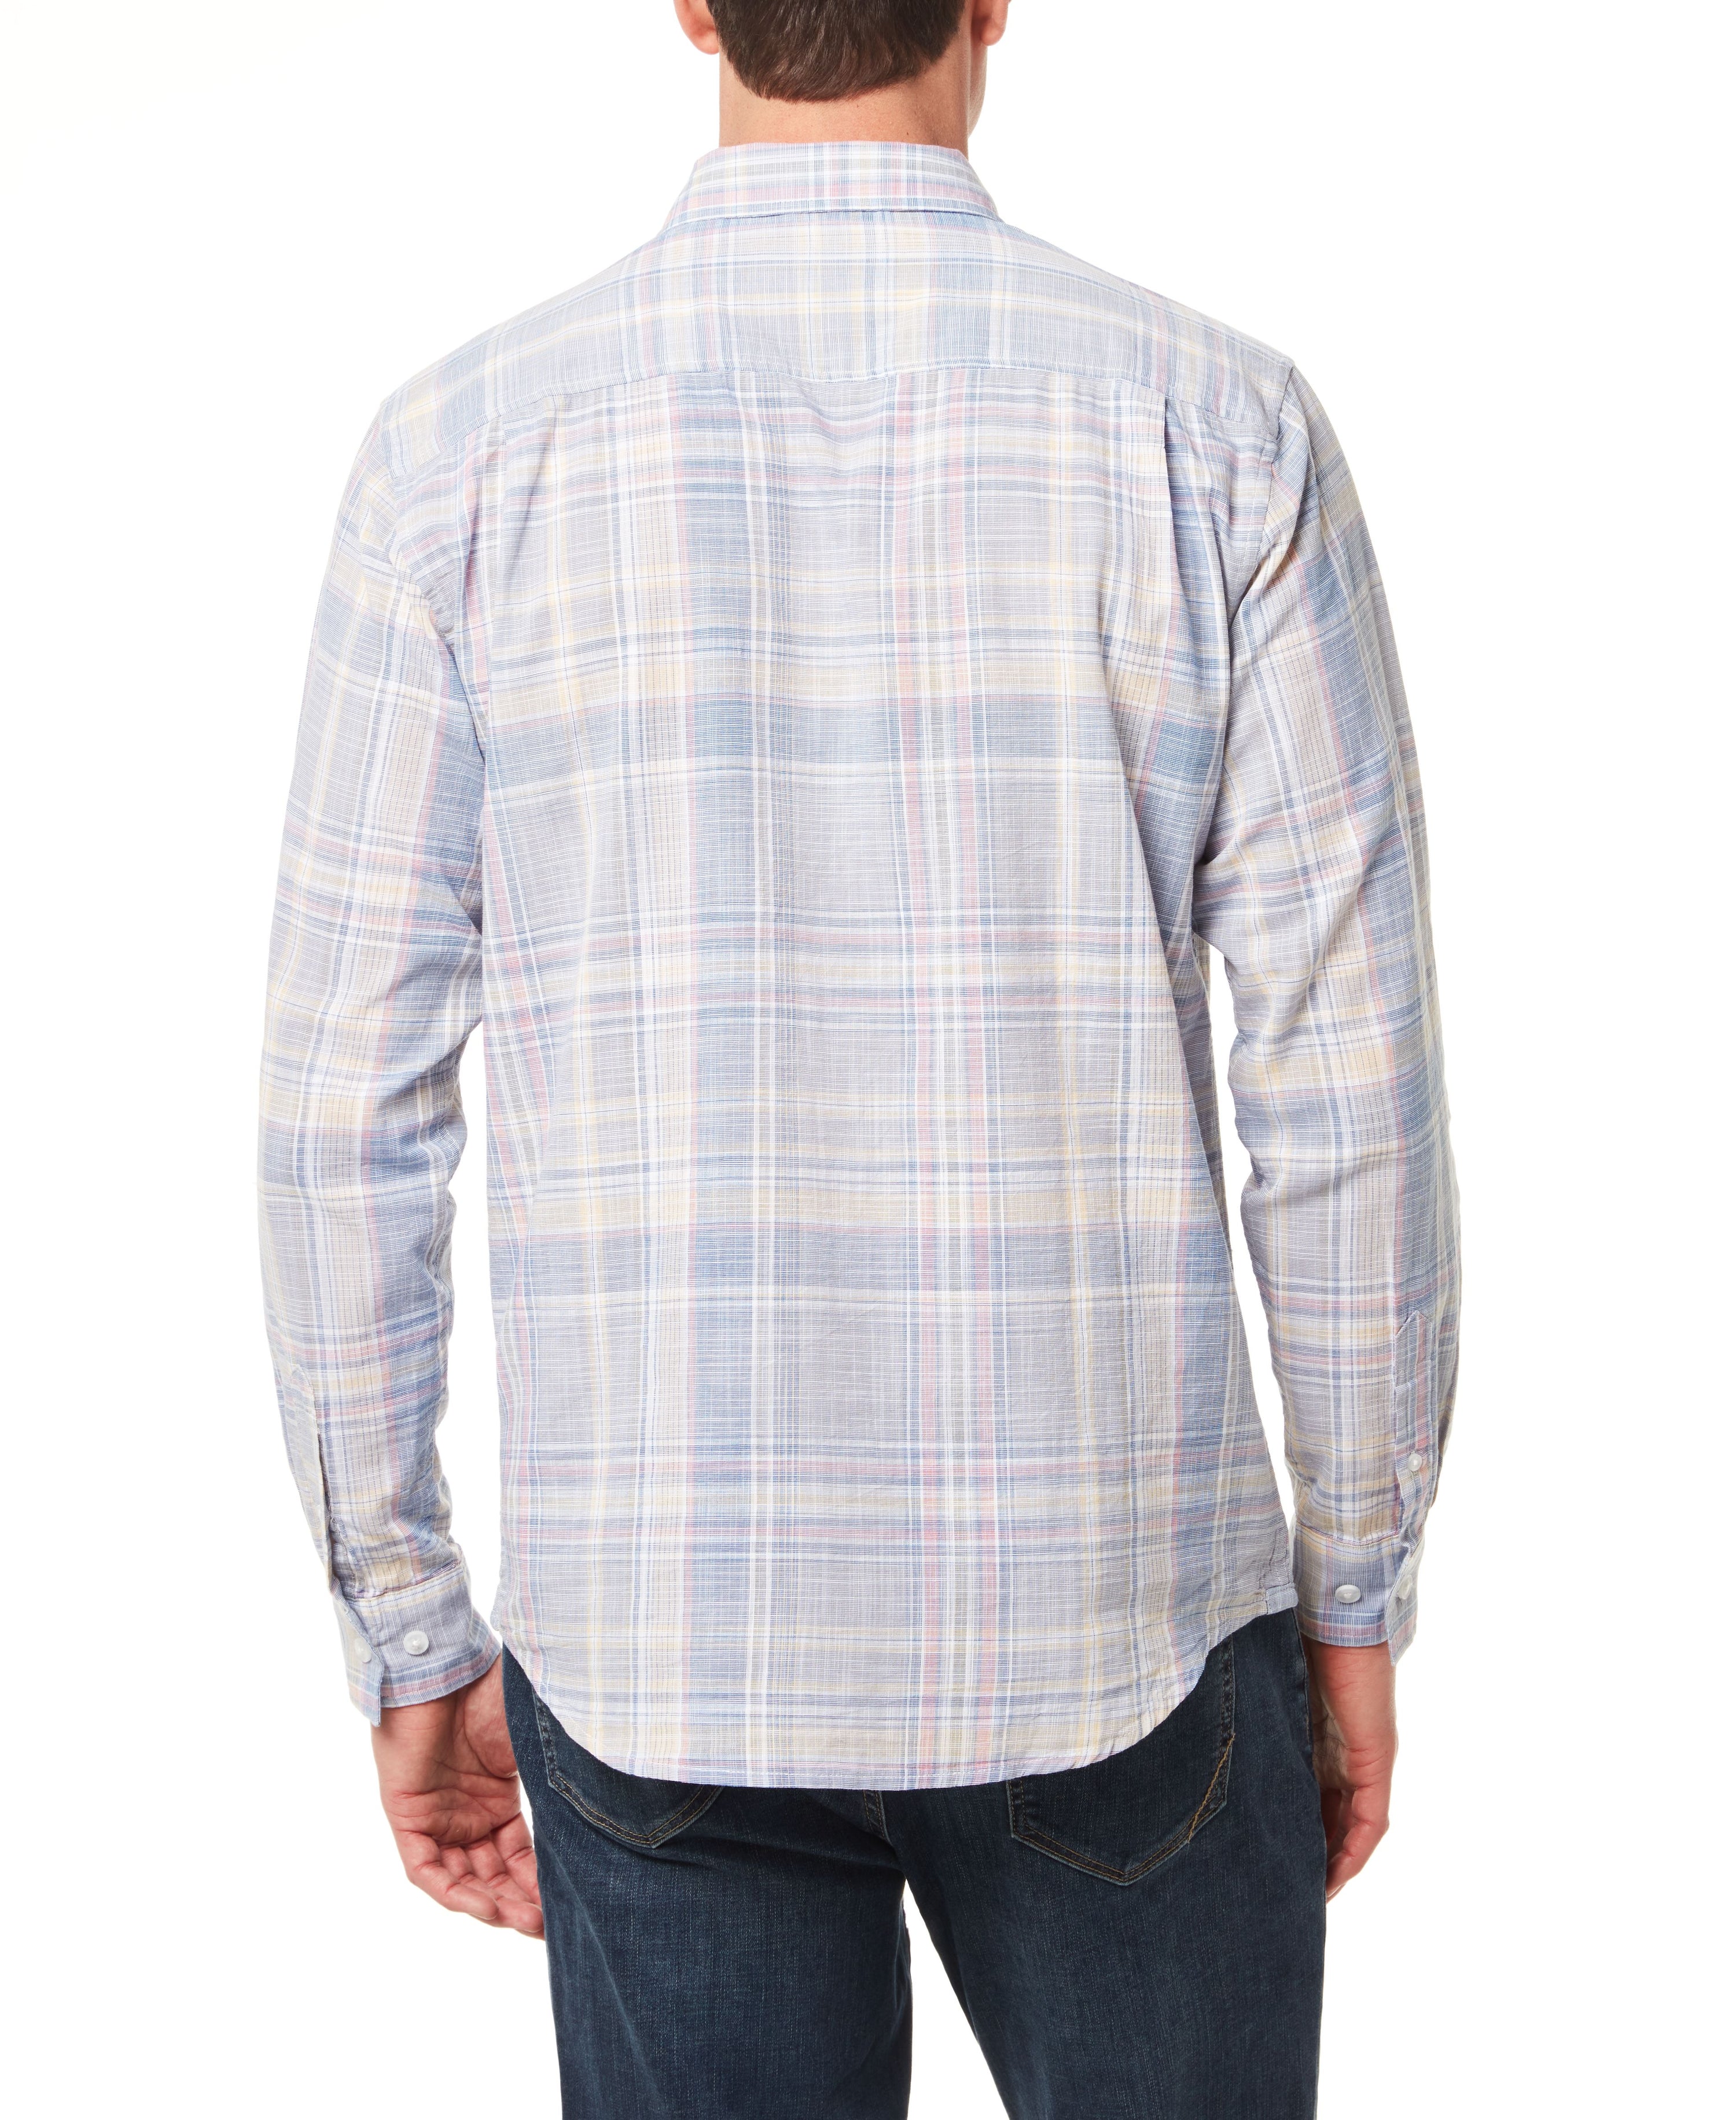 End on End Plaid Shirt in Blue Mirage